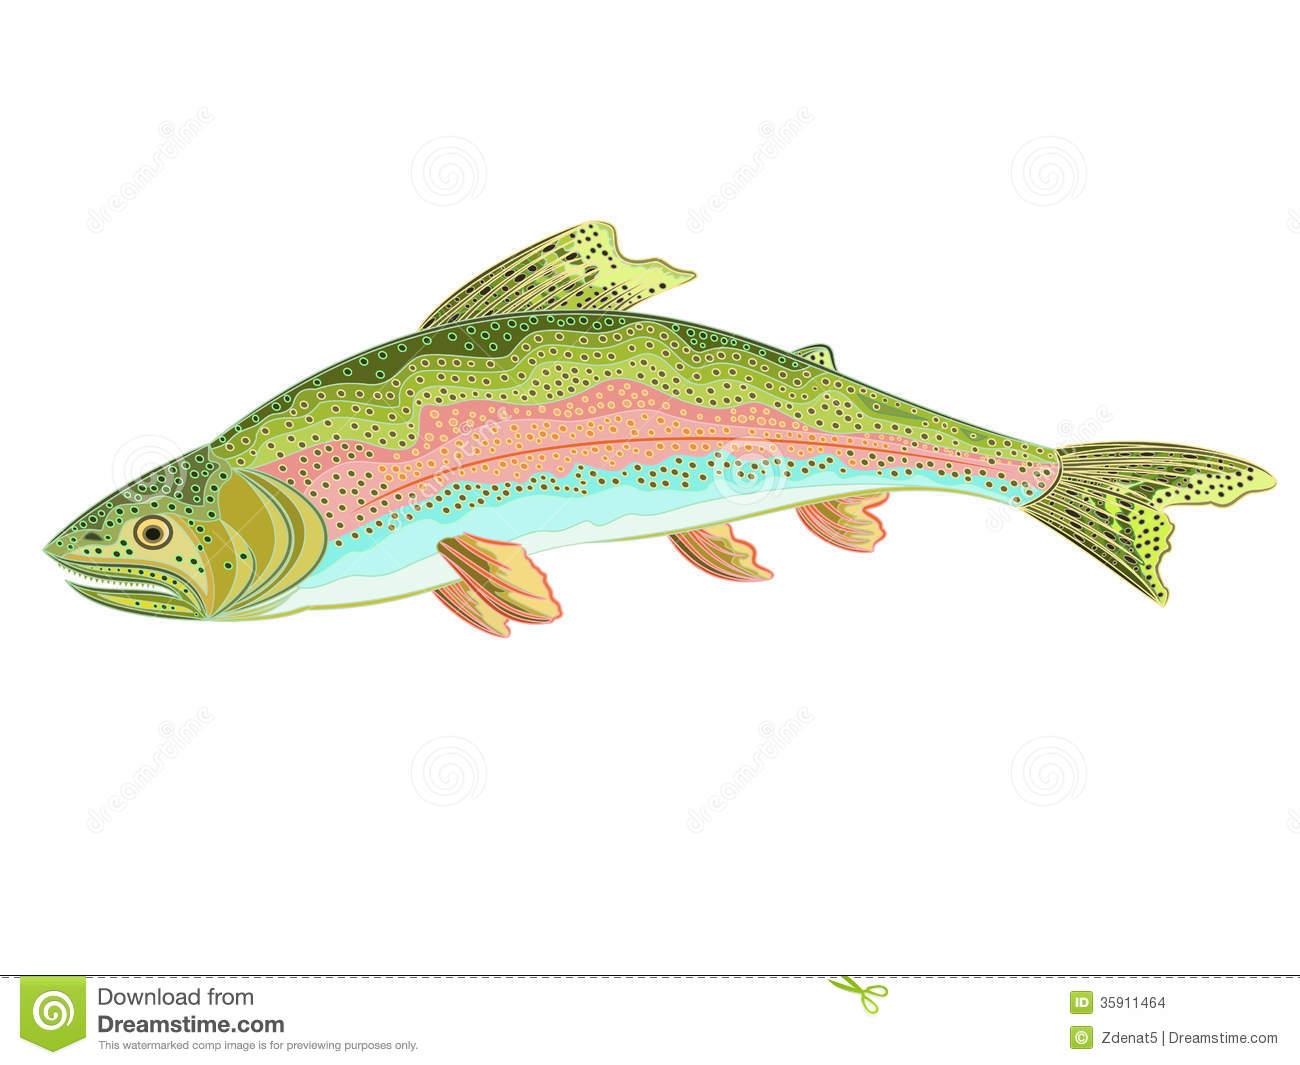 American Rainbow Trout  Oncorhynchus Mykiss  Stock Images   Image